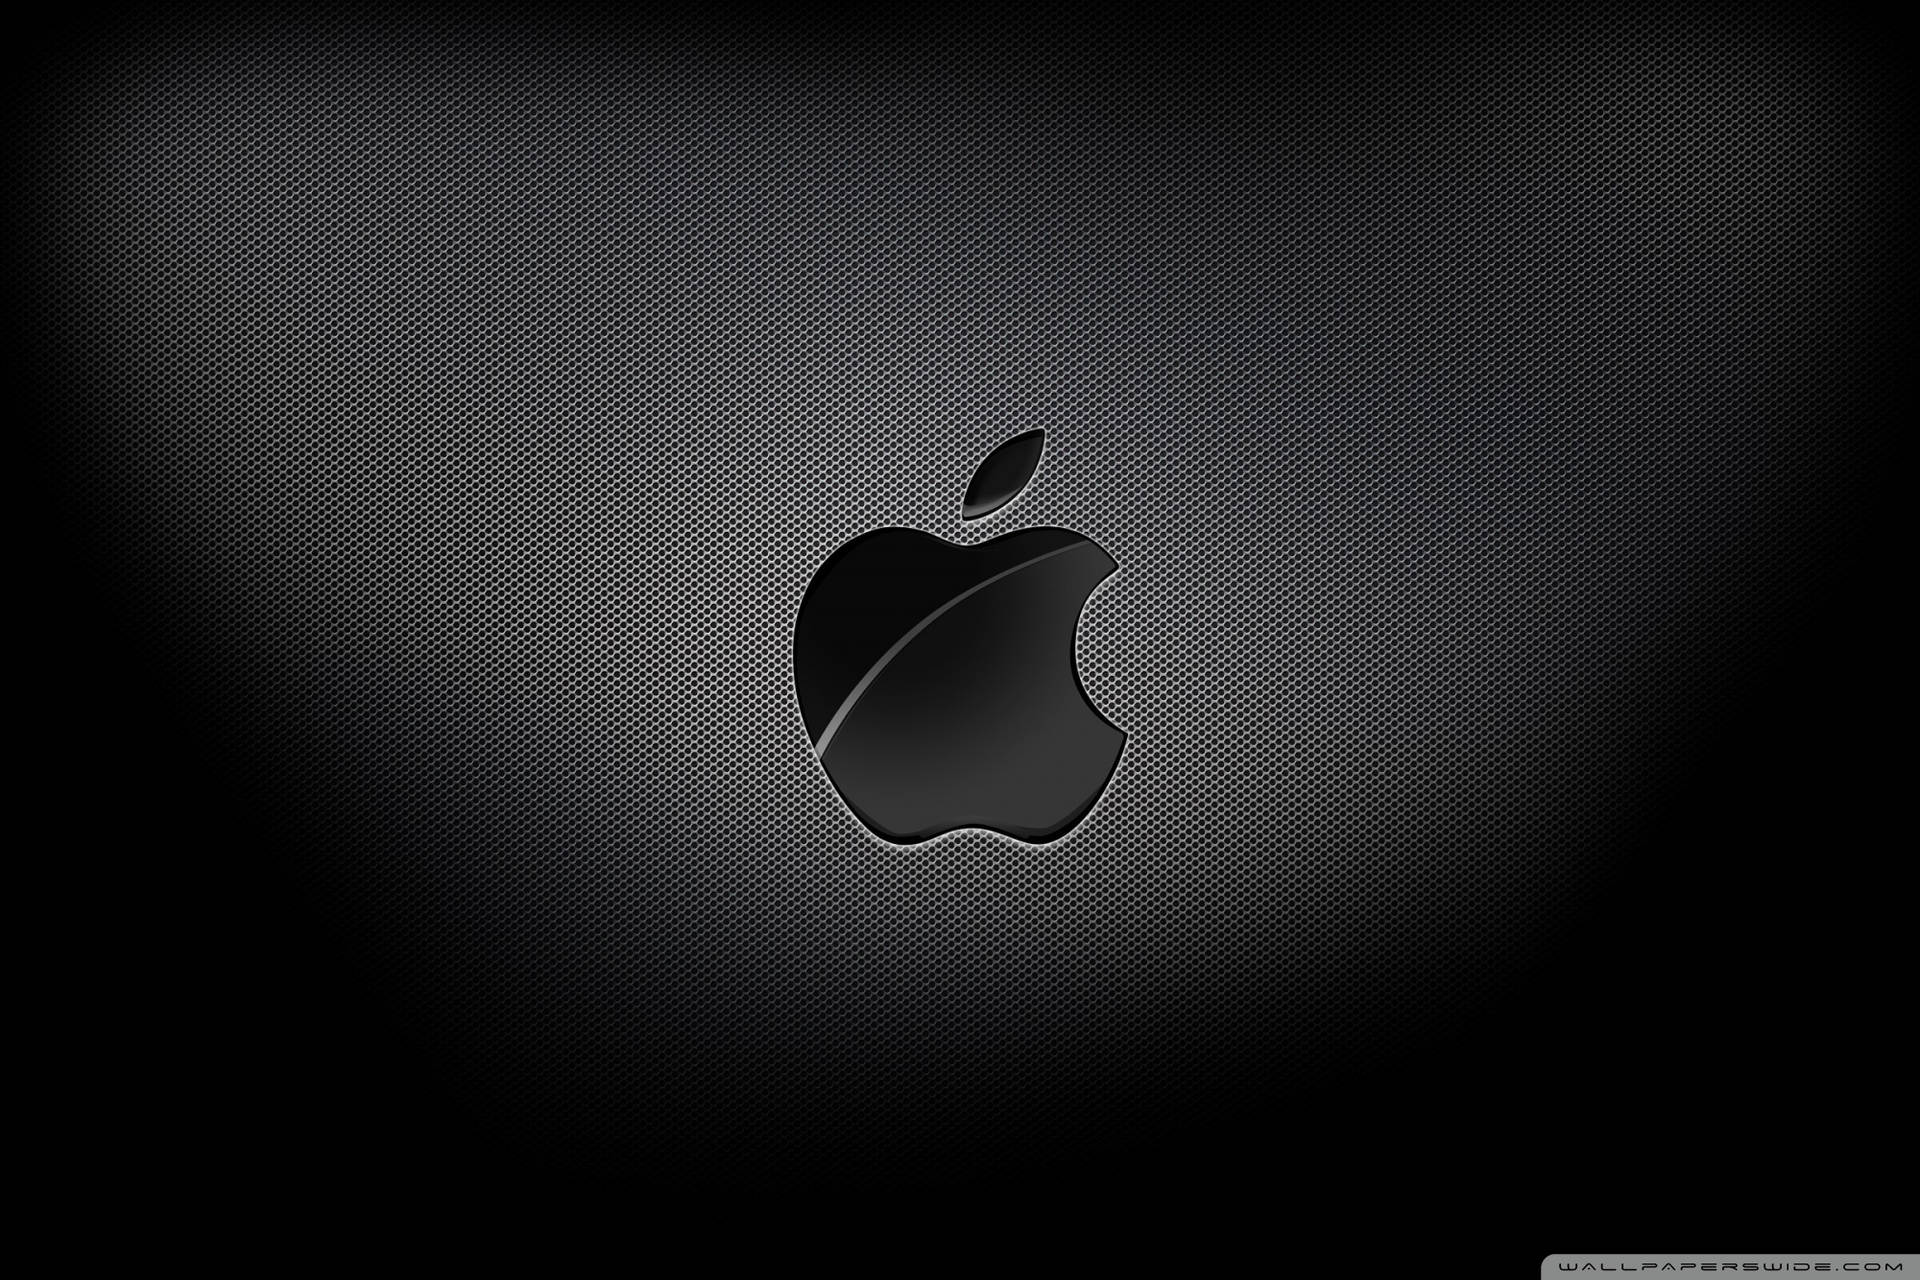 Intriguing Display Of Apple Logo In 4k Resolution On A Black Carbon Texture.